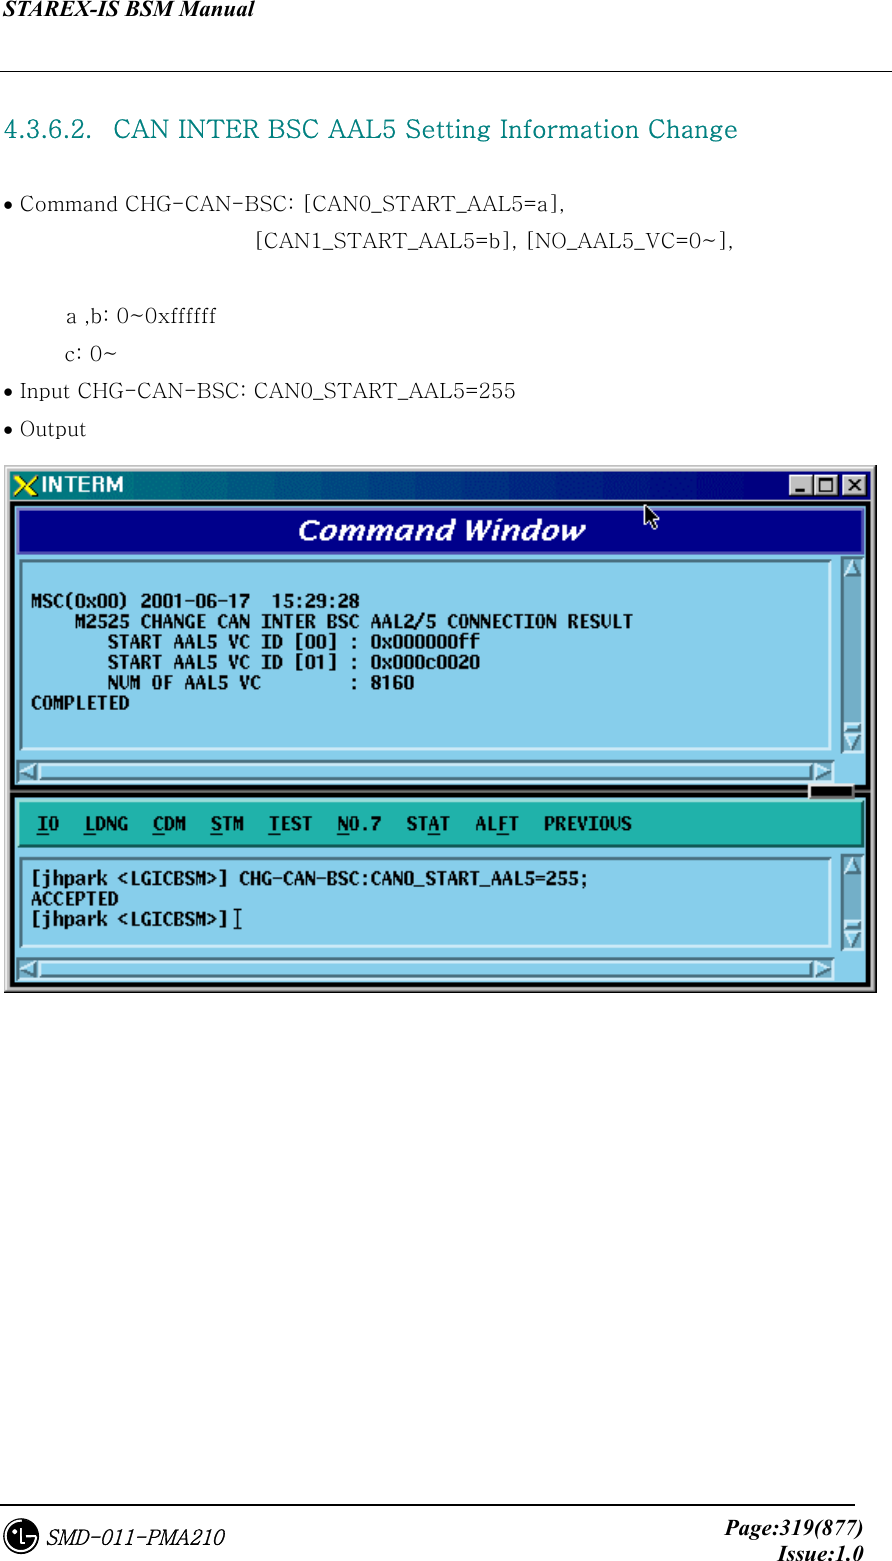 STAREX-IS BSM Manual     Page:319(877)Issue:1.0SMD-011-PMA210  4.3.6.2.   CAN INTER BSC AAL5 Setting Information Change  • Command CHG-CAN-BSC: [CAN0_START_AAL5=a],   [CAN1_START_AAL5=b], [NO_AAL5_VC=0~],     a ,b: 0~0xffffff c: 0~ • Input CHG-CAN-BSC: CAN0_START_AAL5=255 • Output   